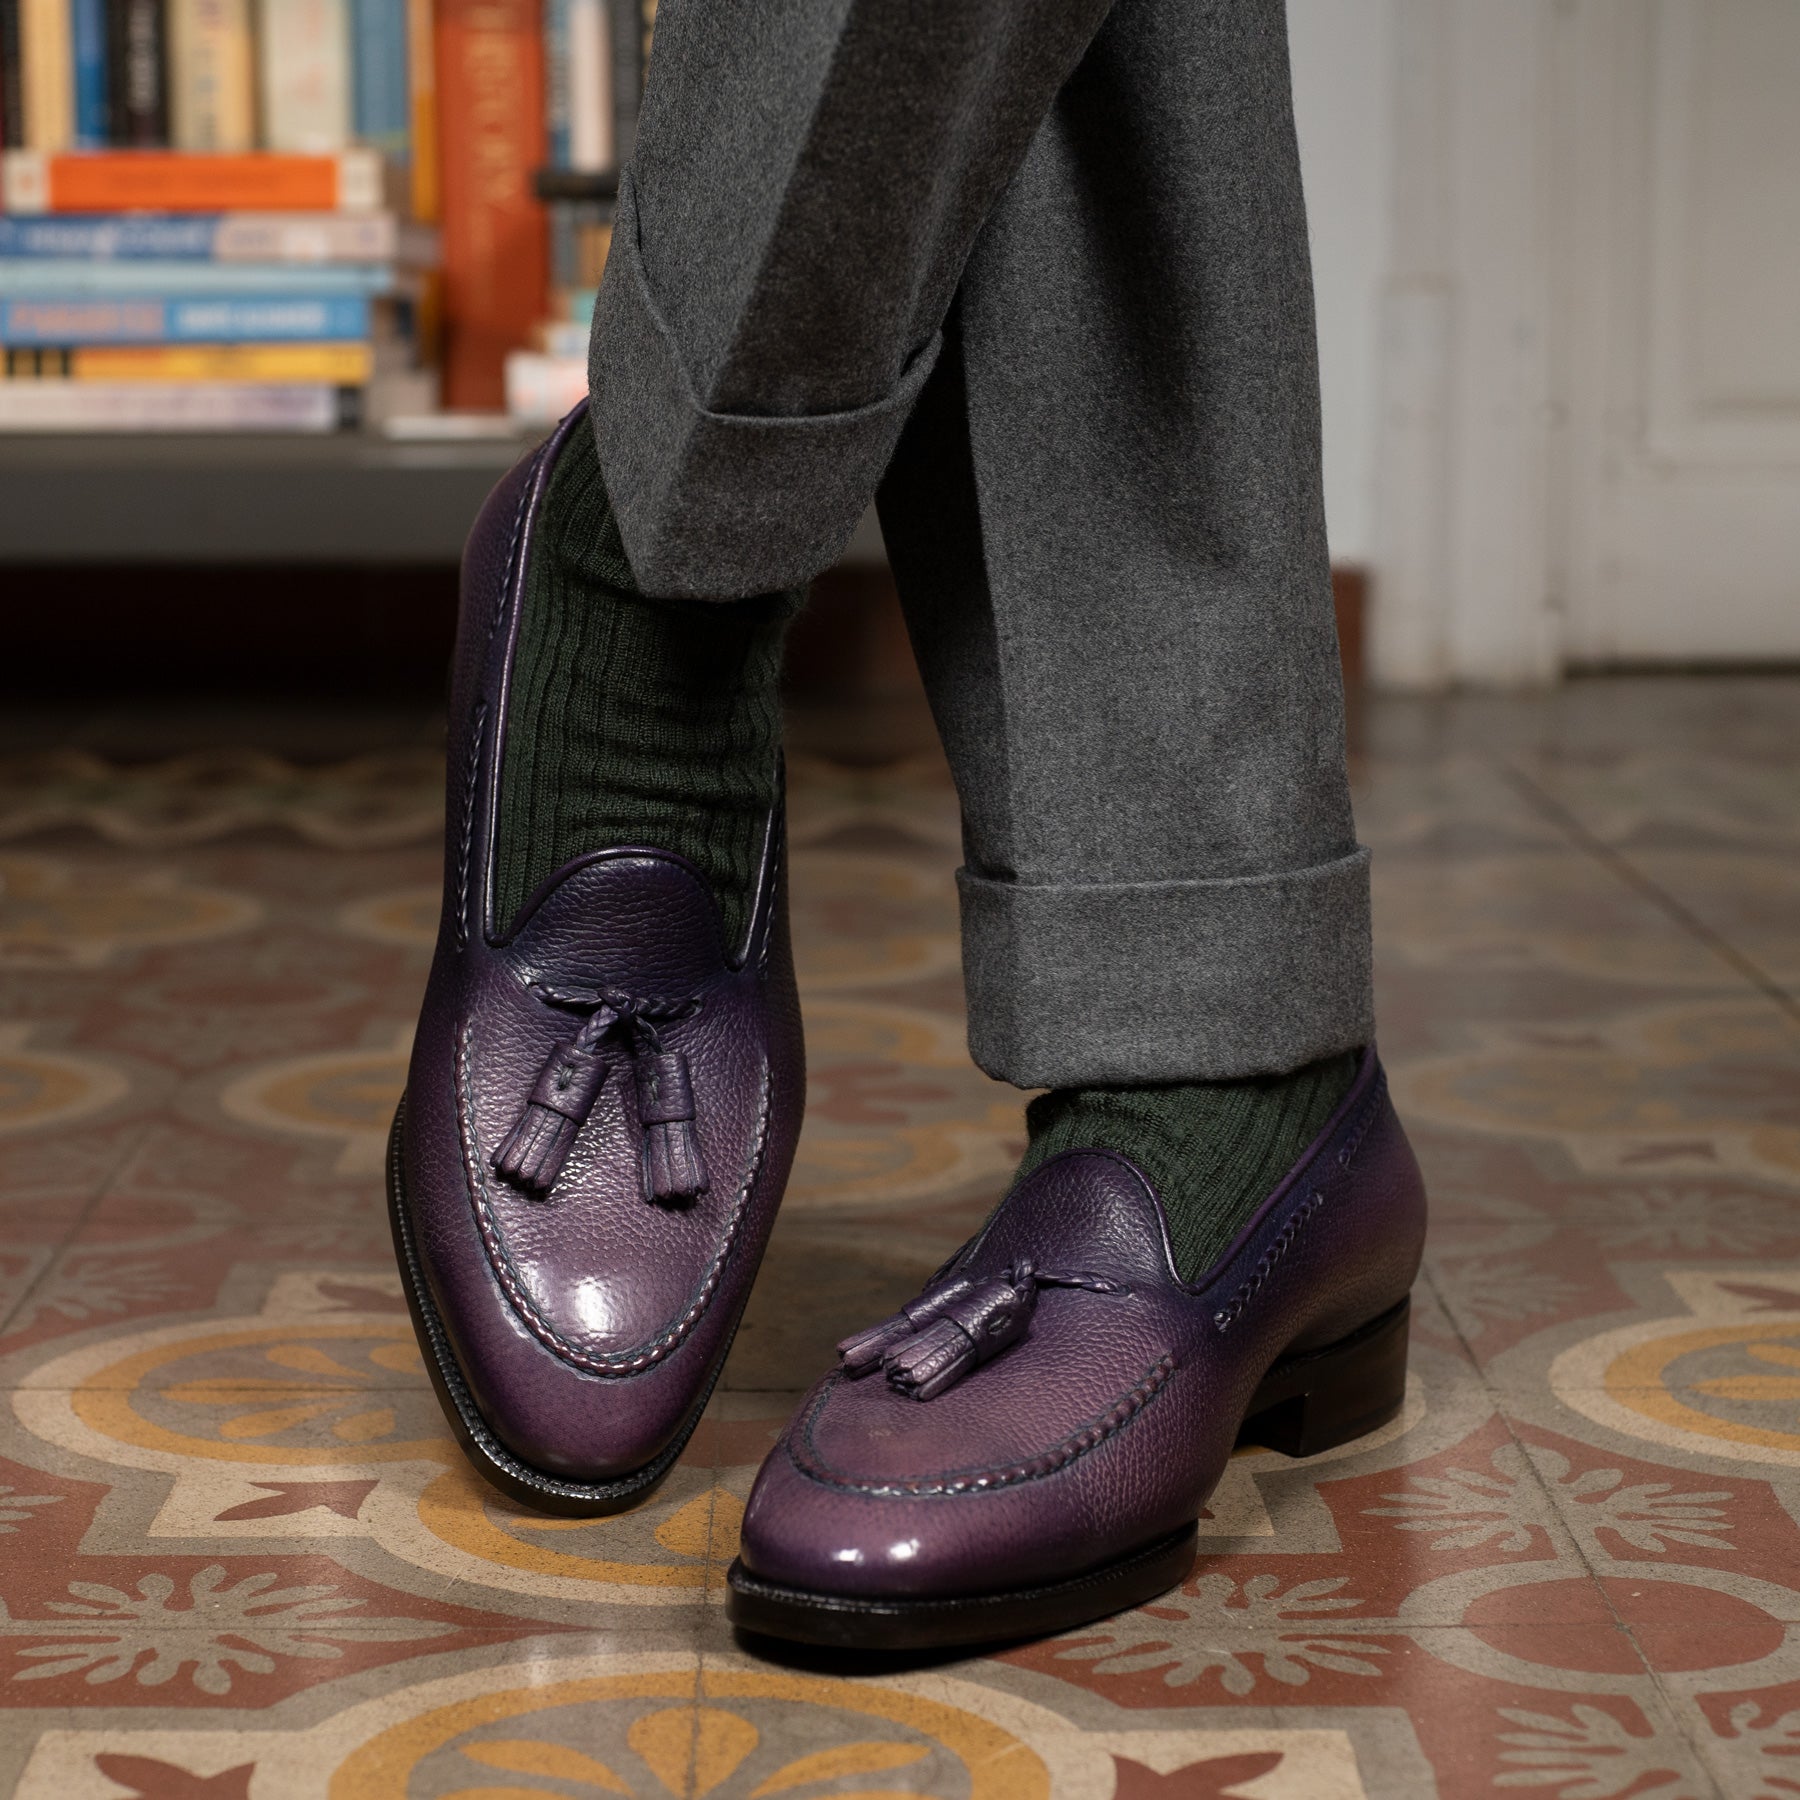 Gillespie Tassel Loafer by Norman Vilalta and Leffot NYC Collaboration